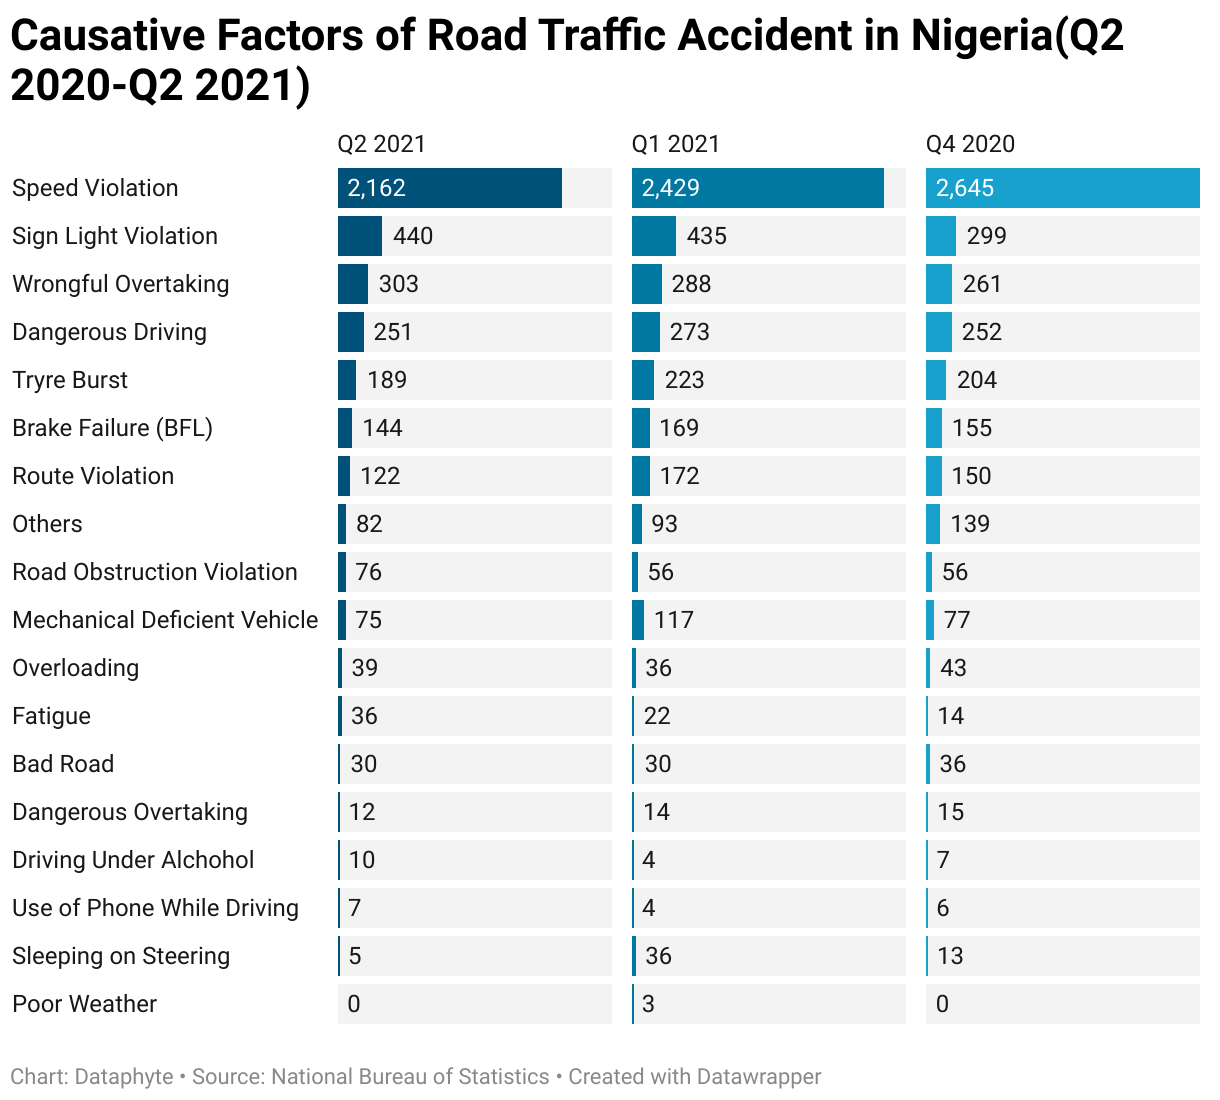 Red Says Stop: Light/Sign Violation Causes 1 in Every 9 Road Traffic Accidents in Nigeria